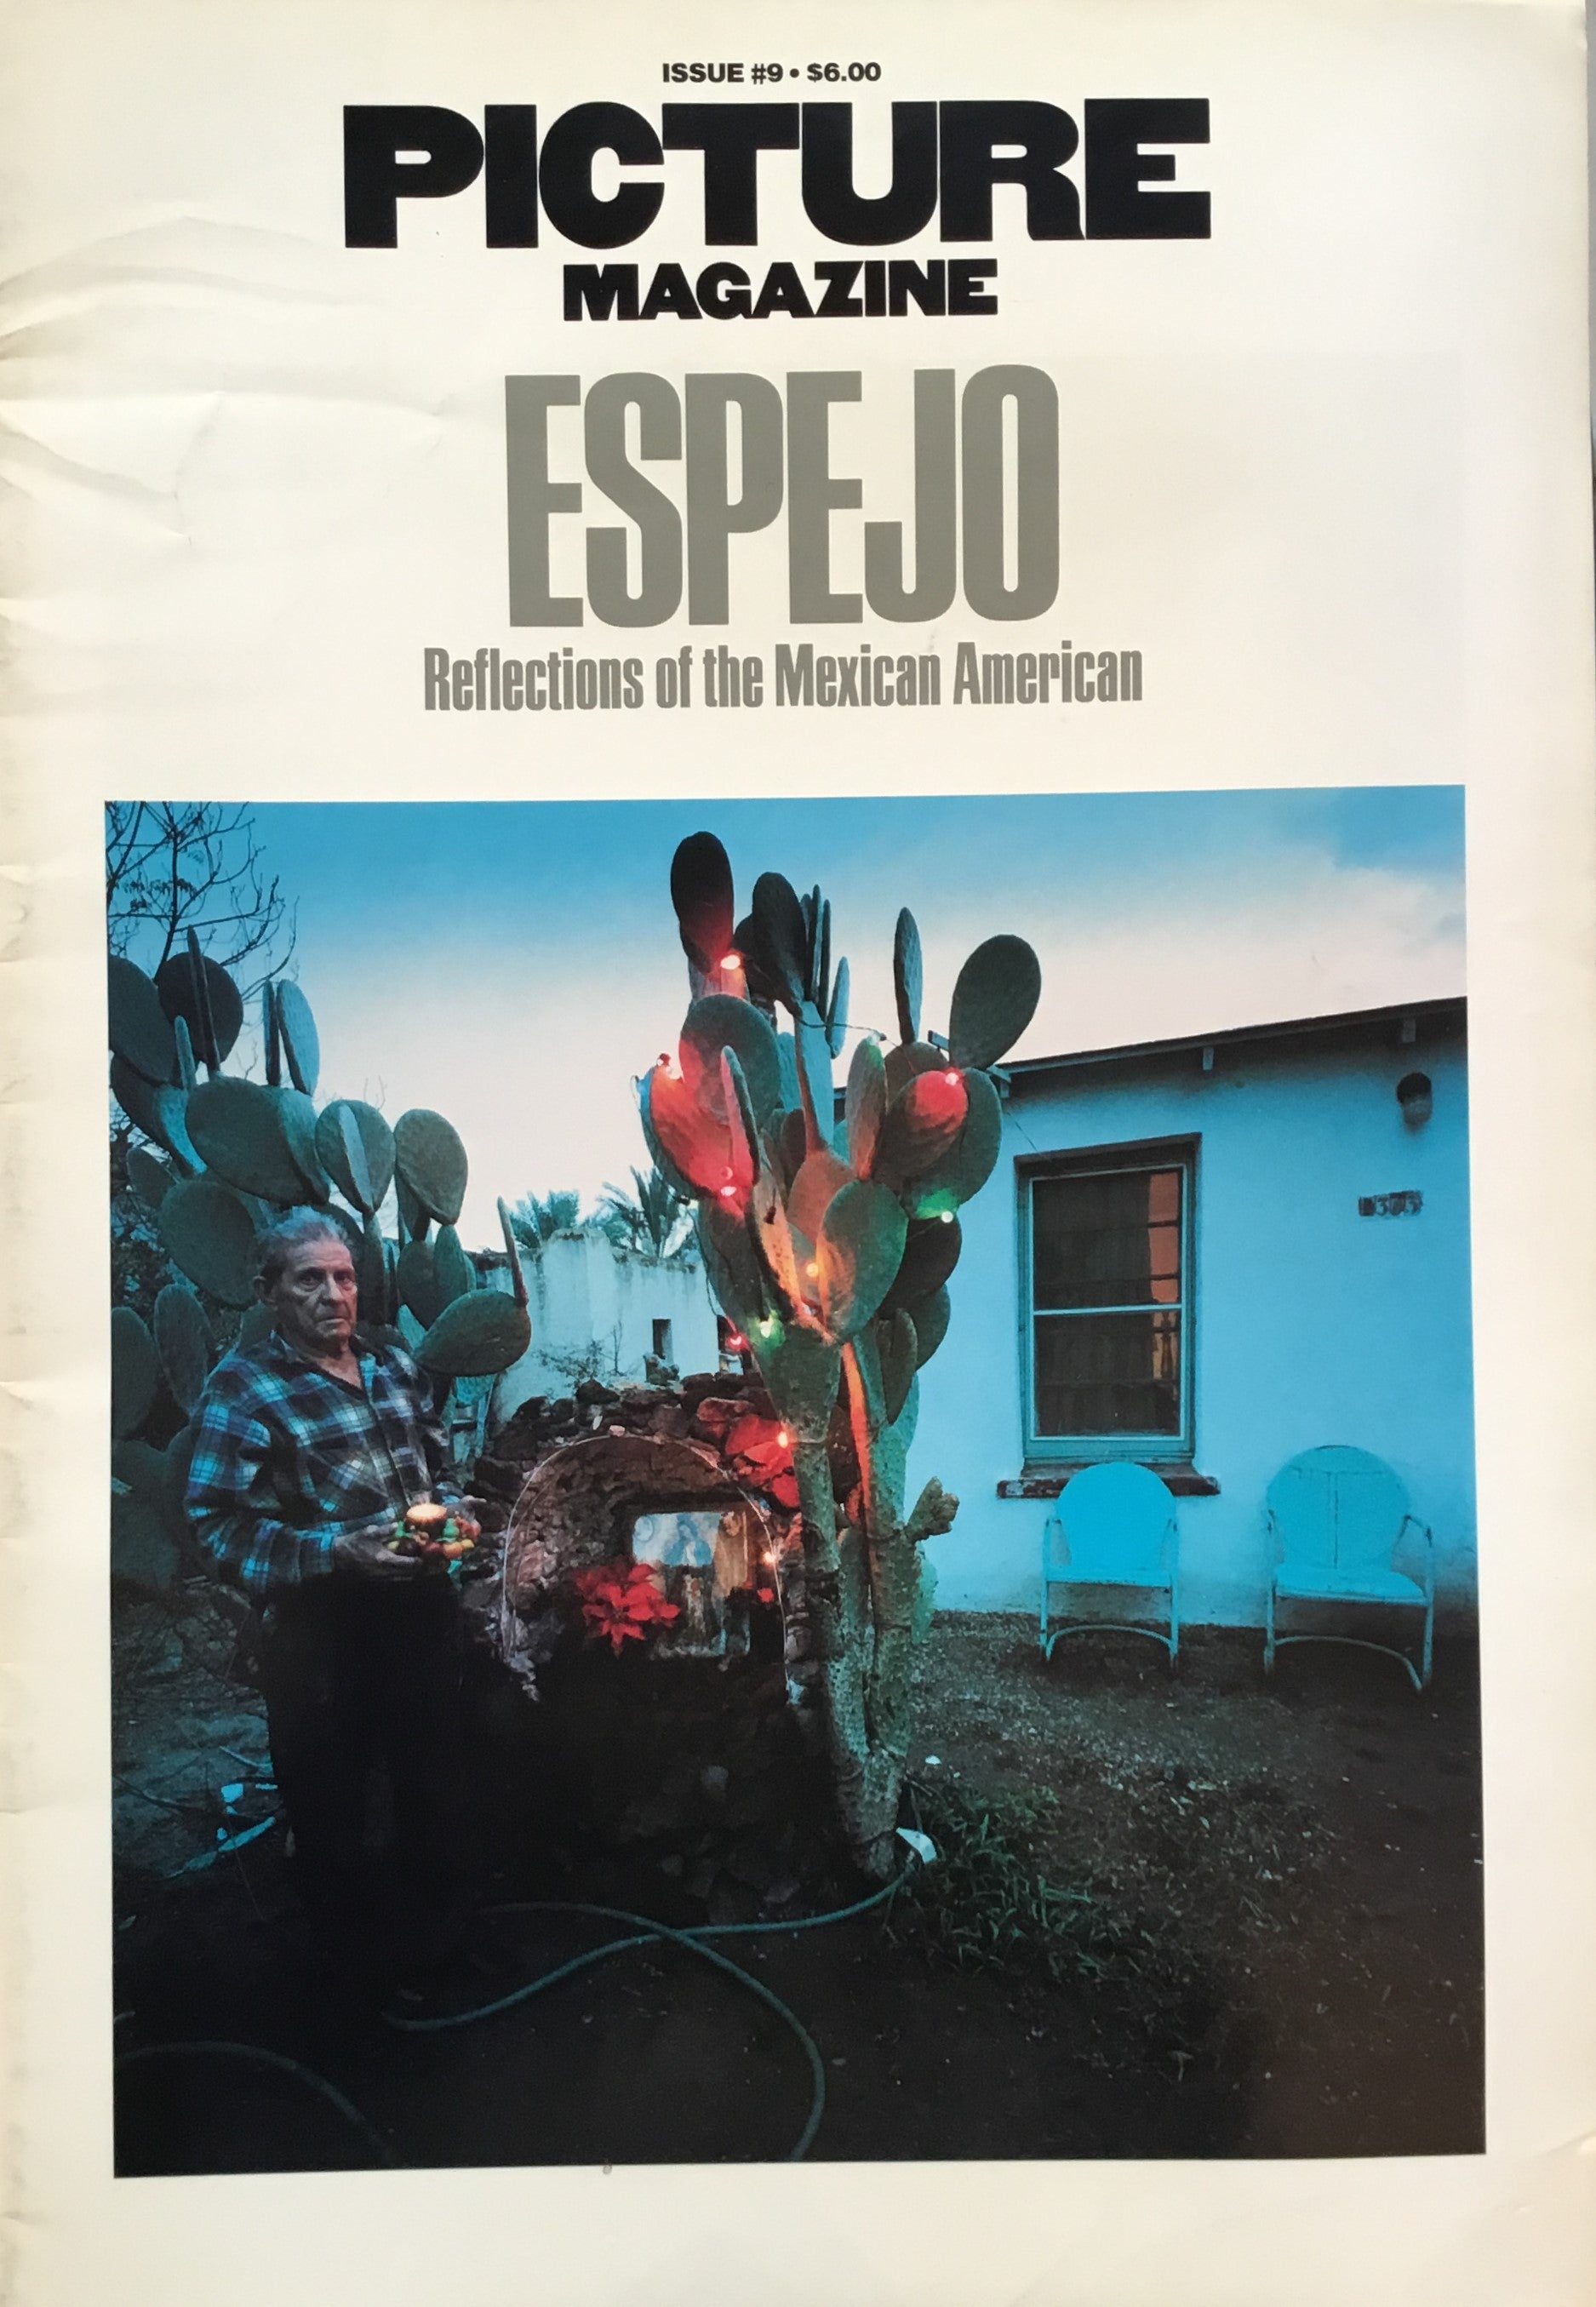 PICTURE MAGAZINE ISSUE #9　1978　ESPEJO Reflections of the Mexican American